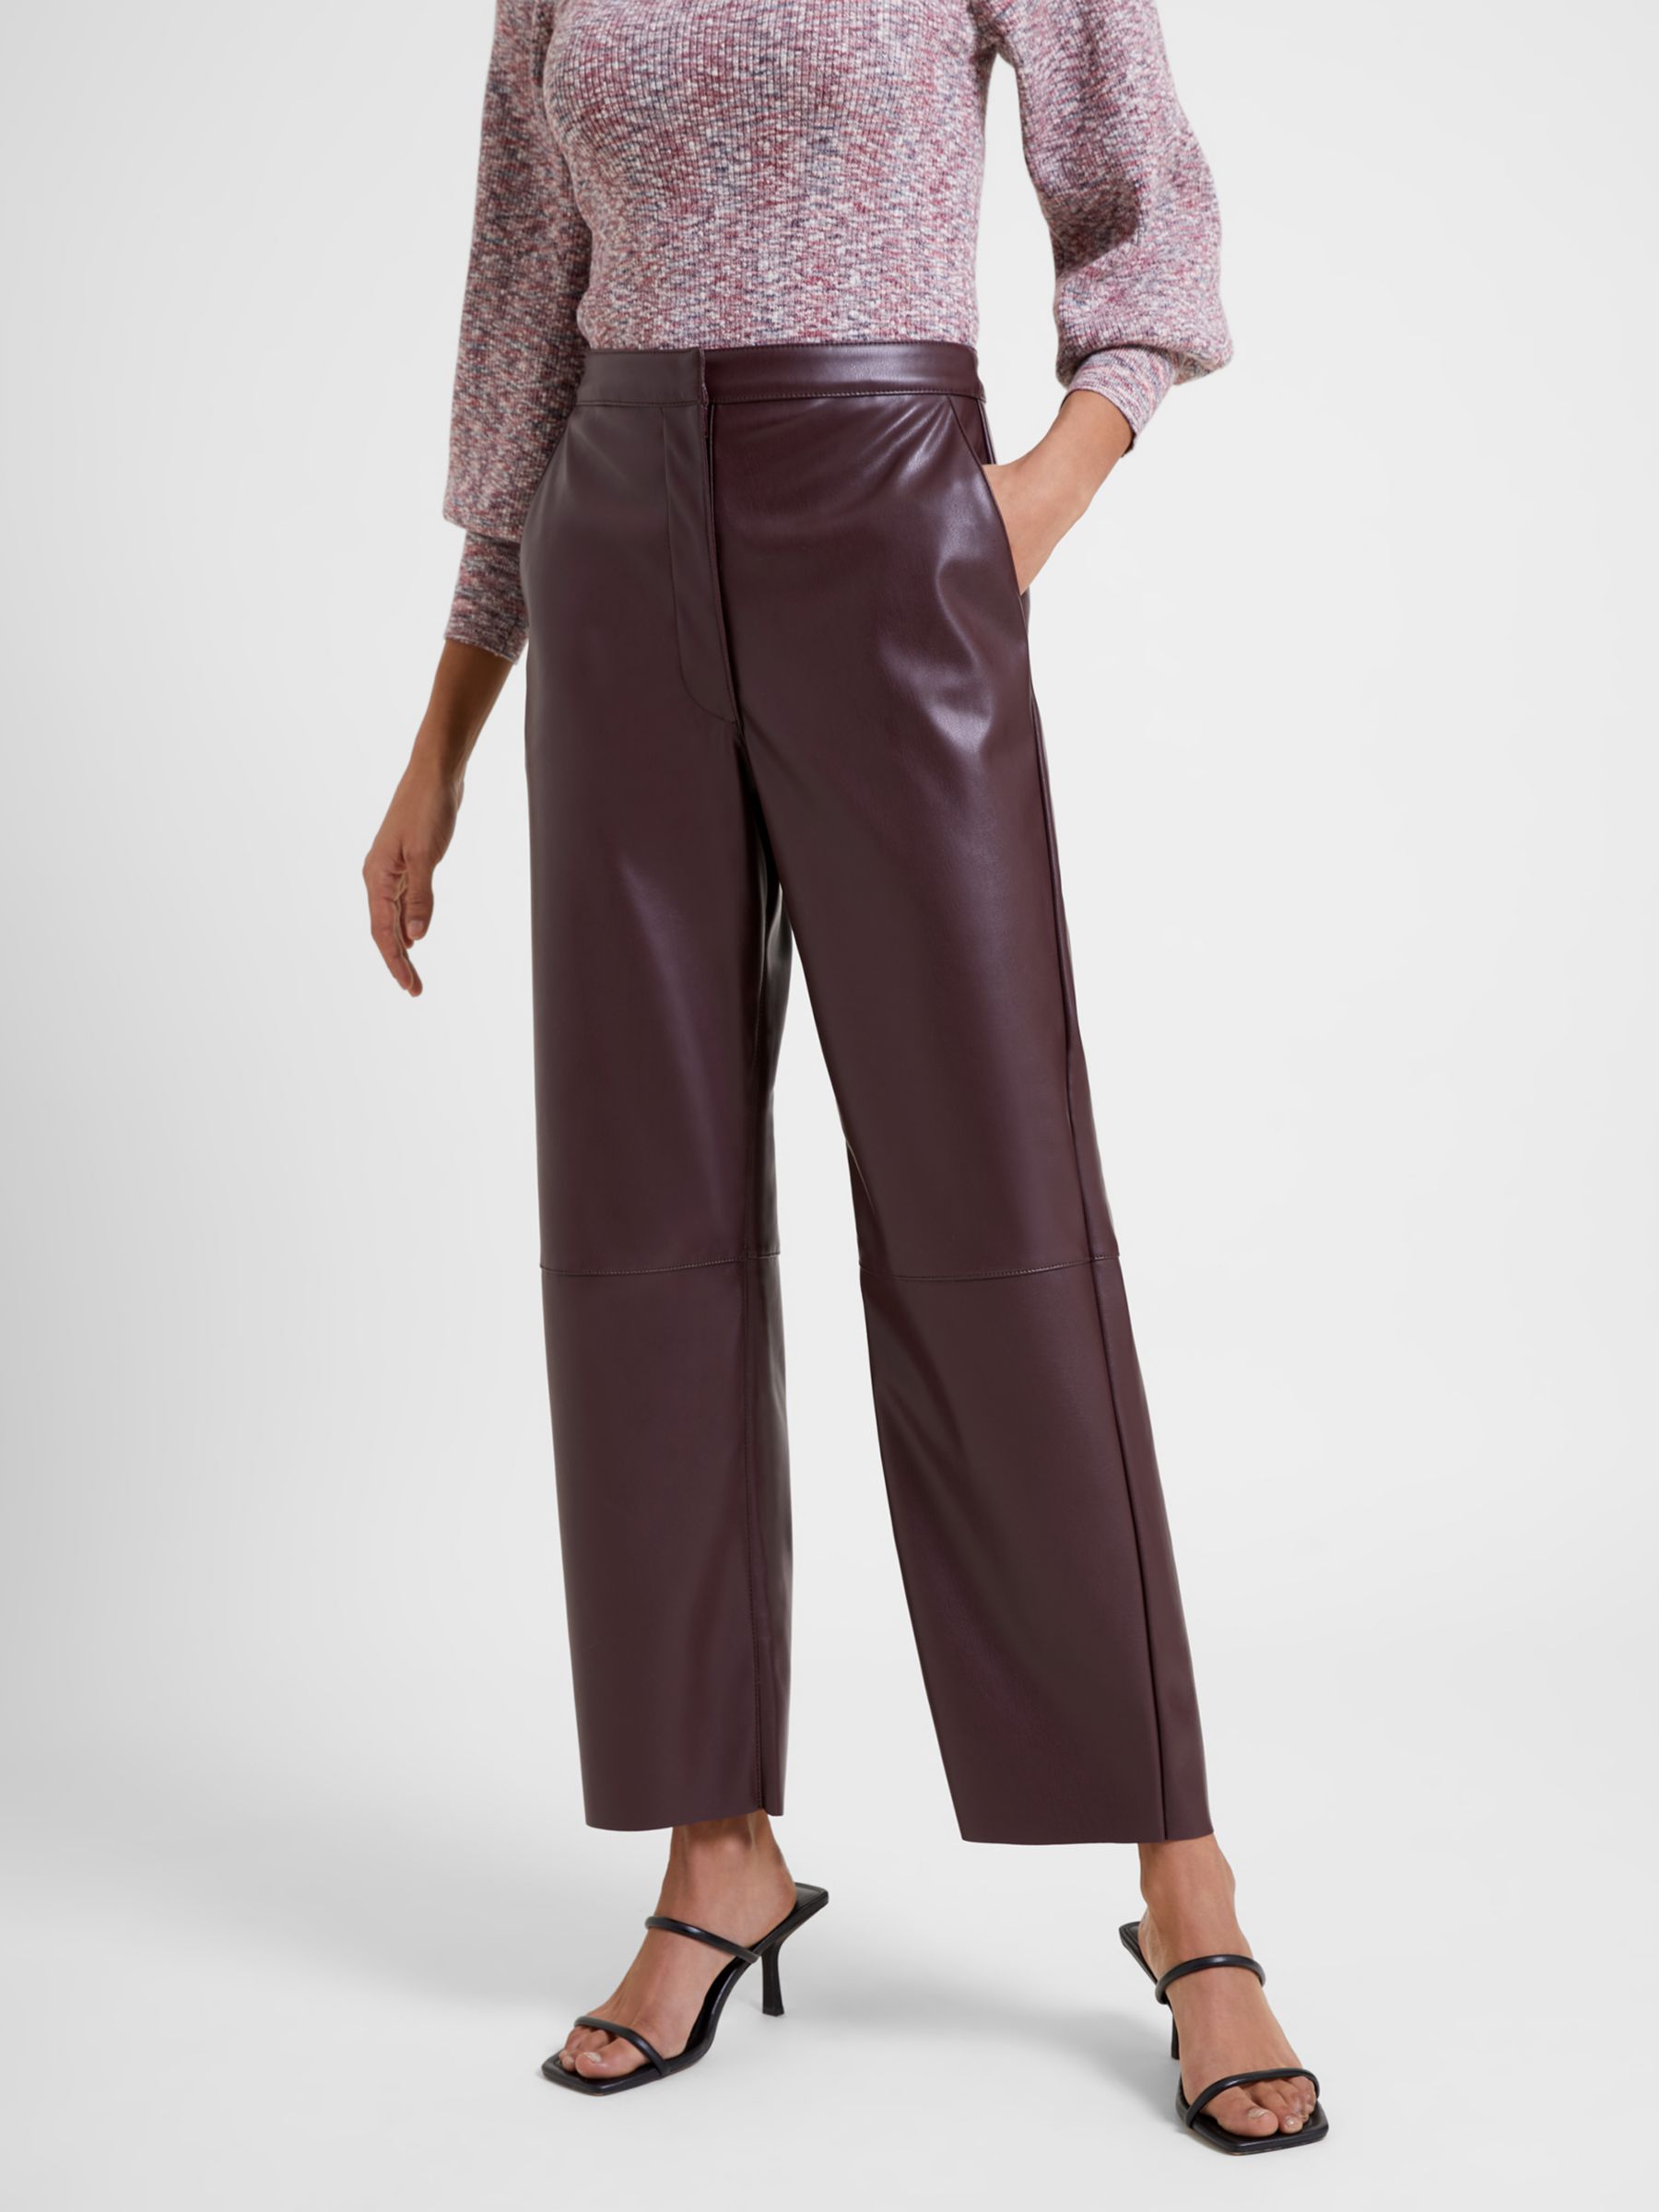 Great Plains Ania Faux Leather Trousers, Cocoa, 6